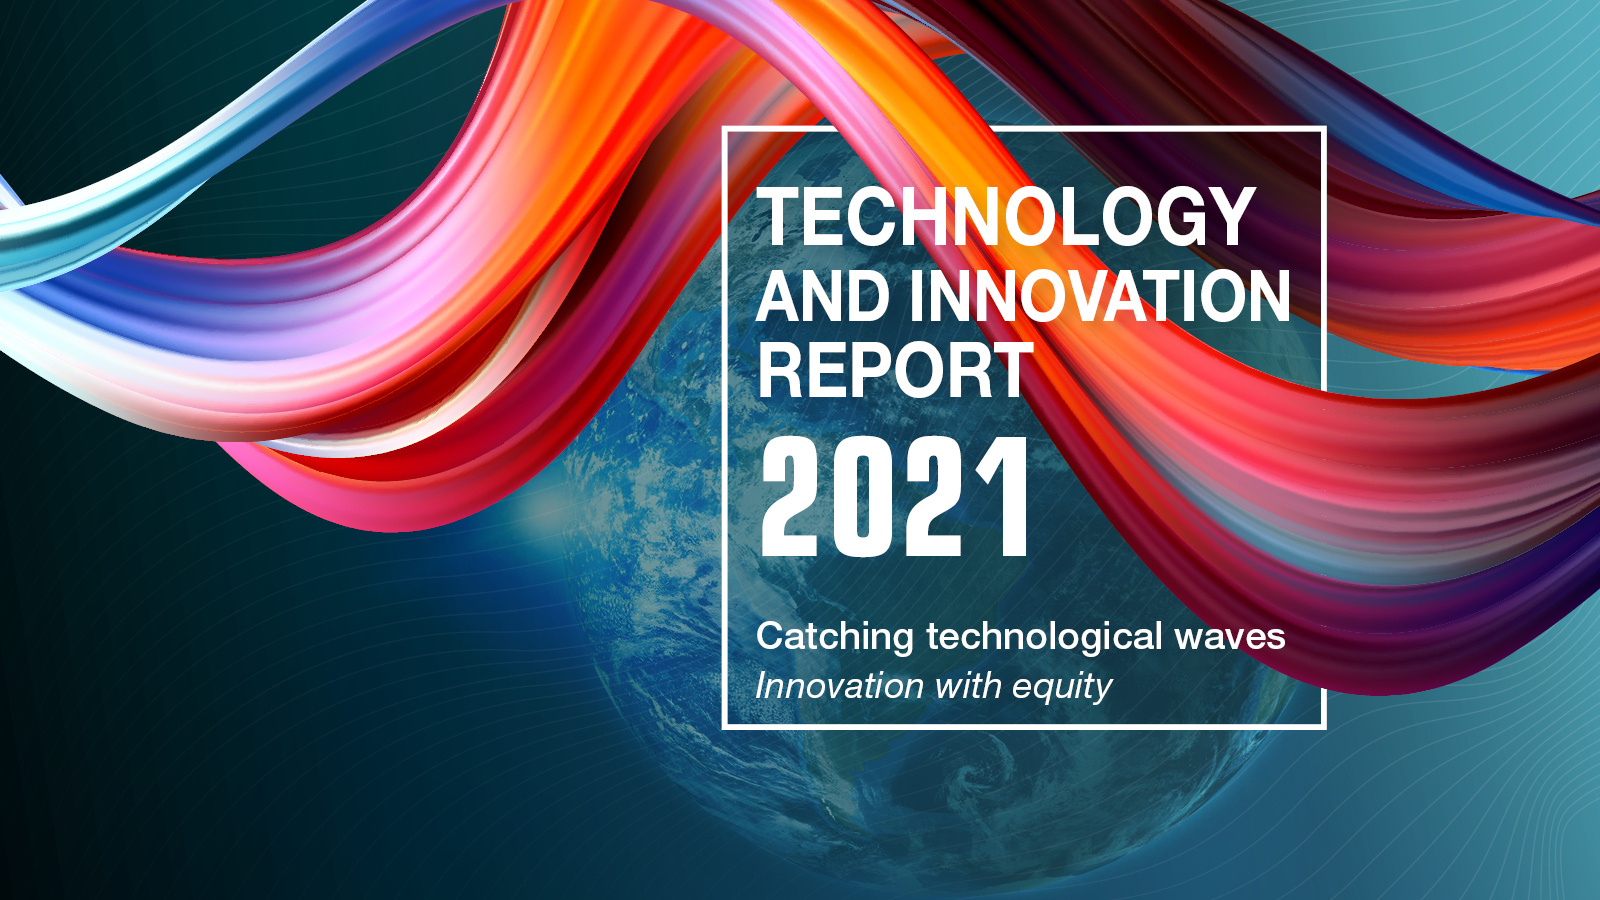 Presentation of the Technology and Innovation Report 2021 UNCTAD